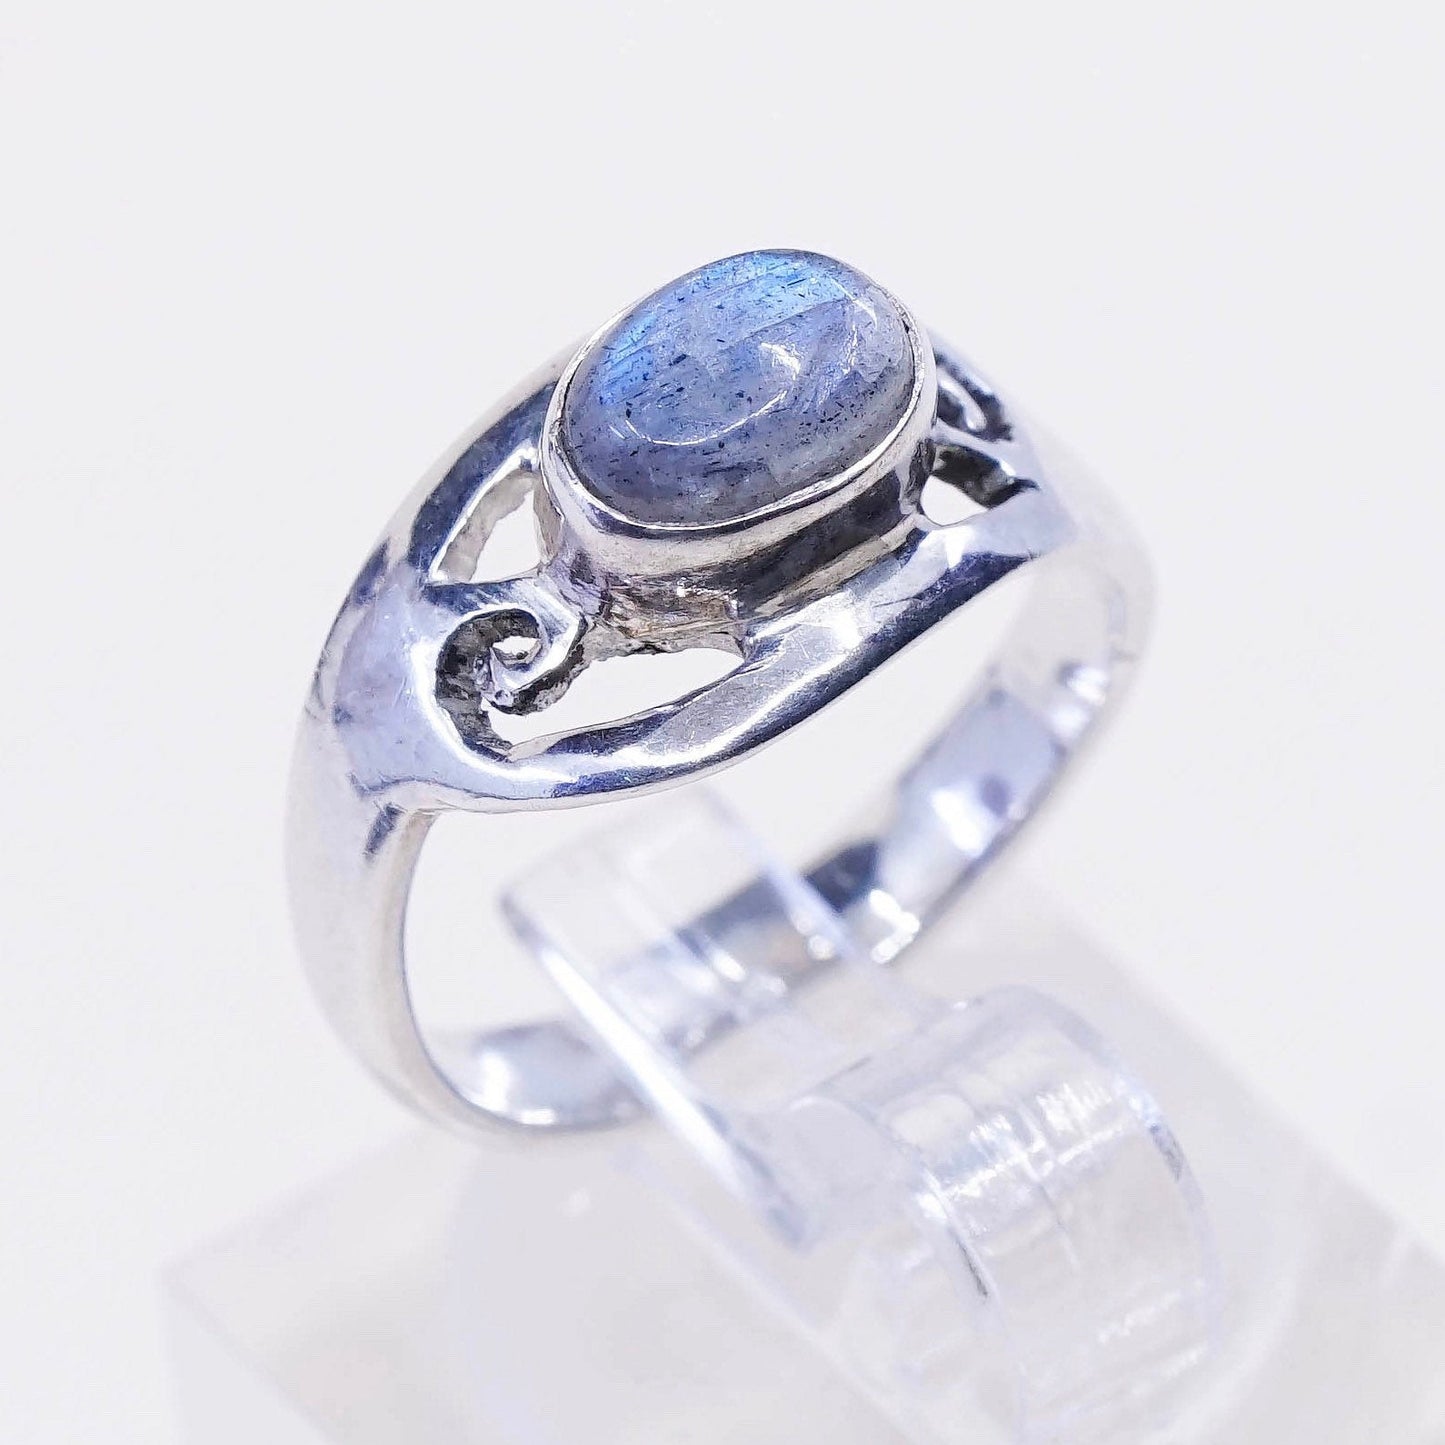 Size 4.25, vintage sterling 925 silver handmade ring with moonstone